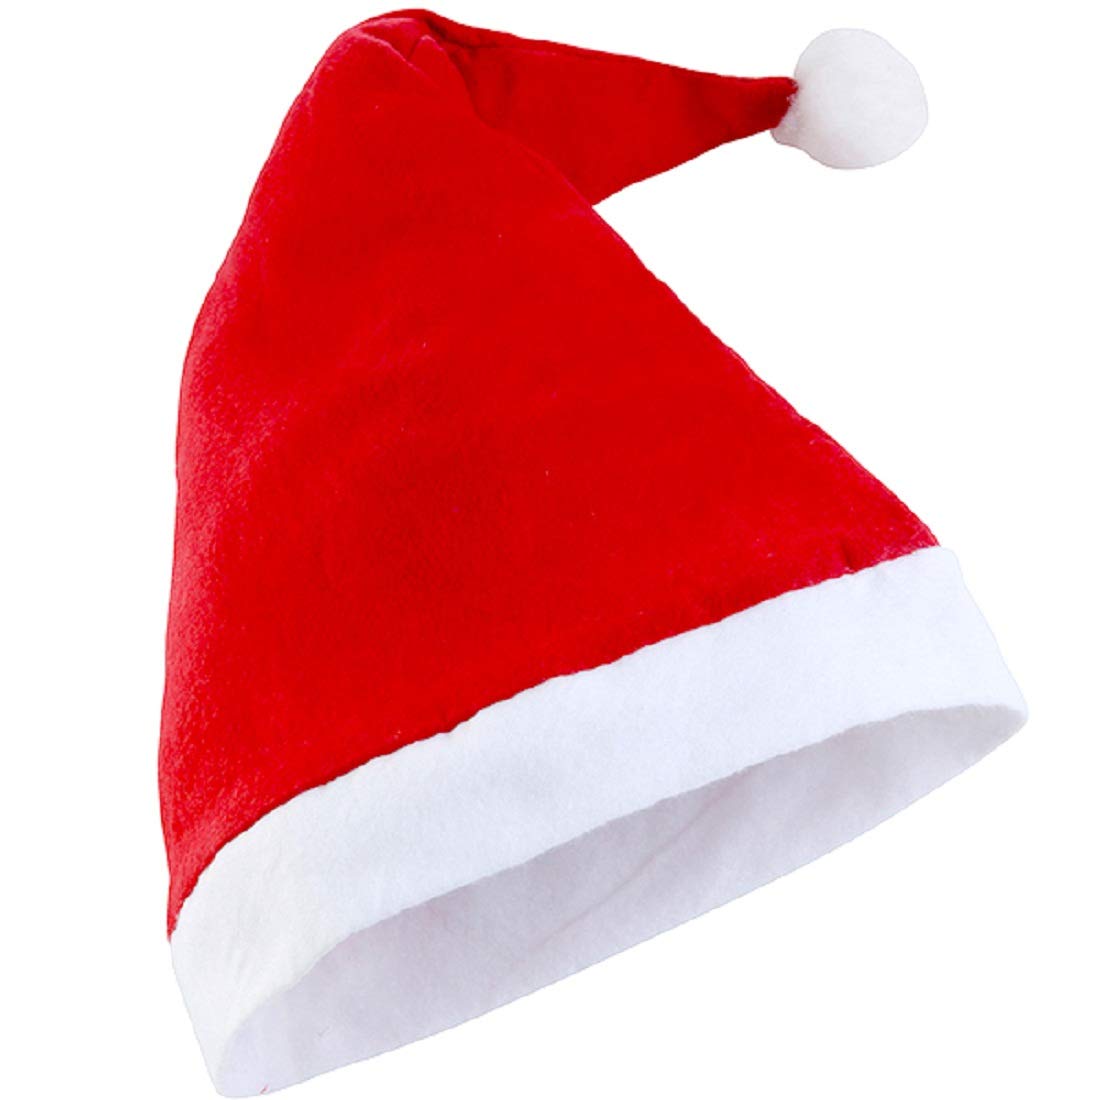 eCraftIndia Red and White Merry Christmas Hats, Santa Claus Caps for kids and Adults - Free Size XMAS Caps, Santa Claus Hats for Christmas, New Year, Festive Holiday Party (Set of 30) 2